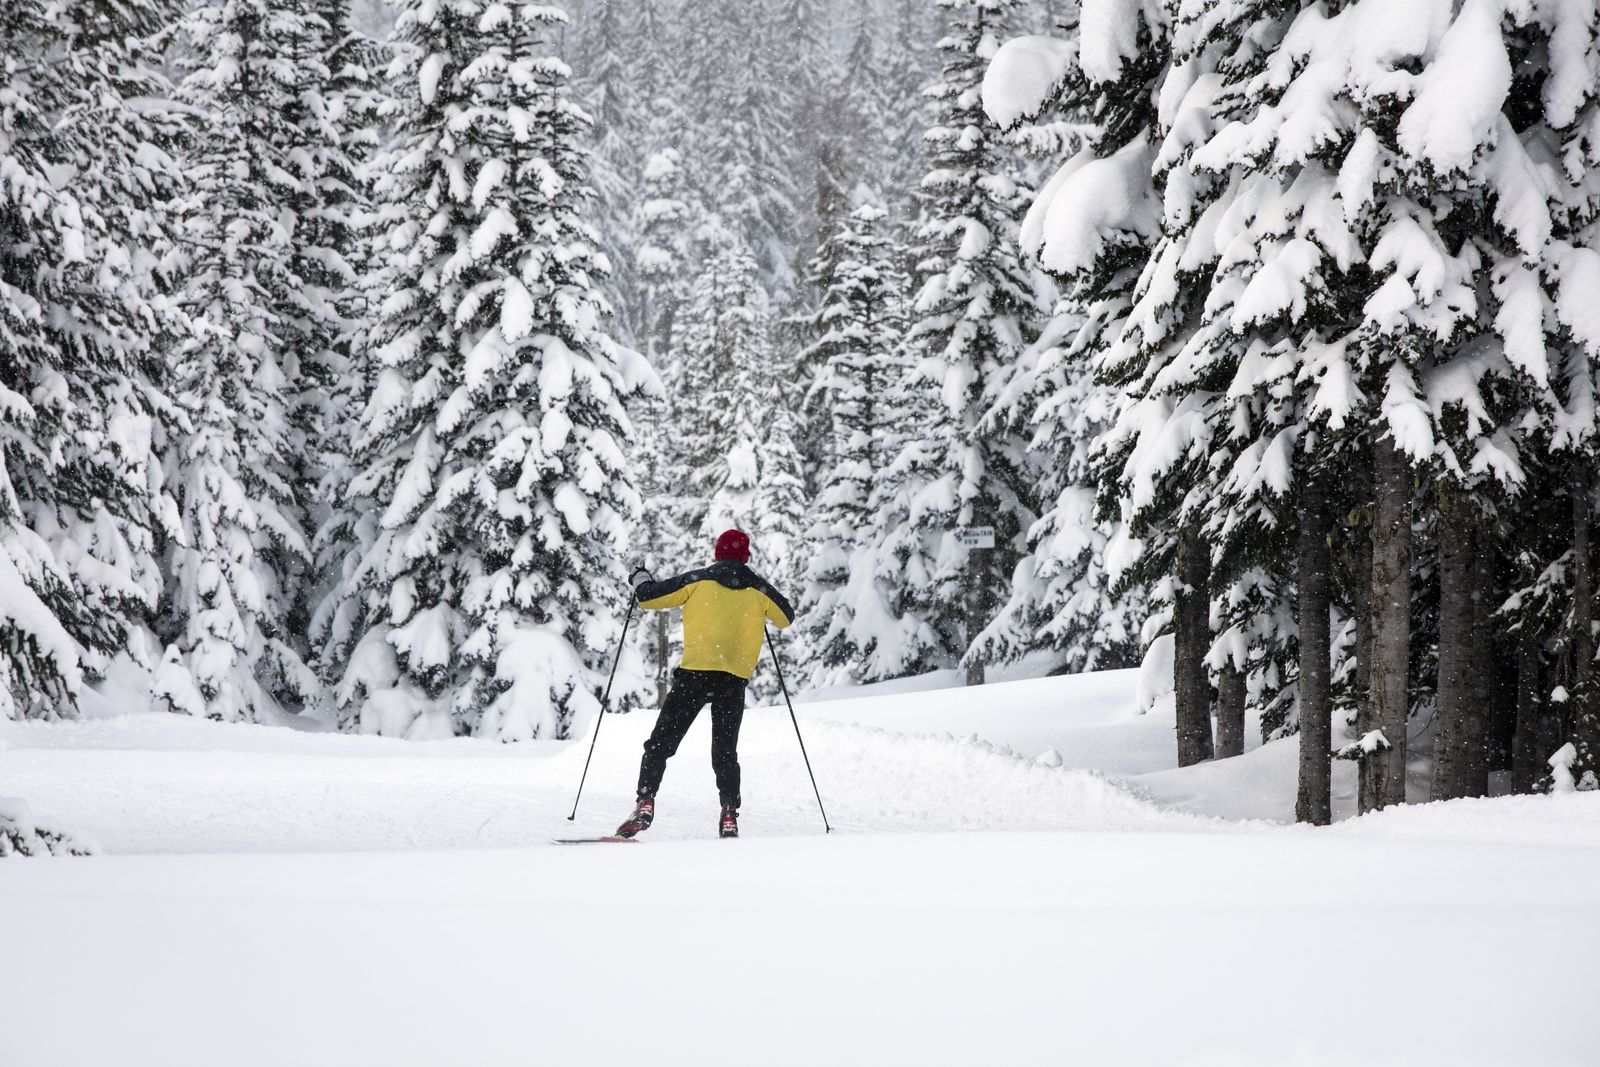 Man in a yellow jacket cross-country skiing in the mountain snow in Oregon.